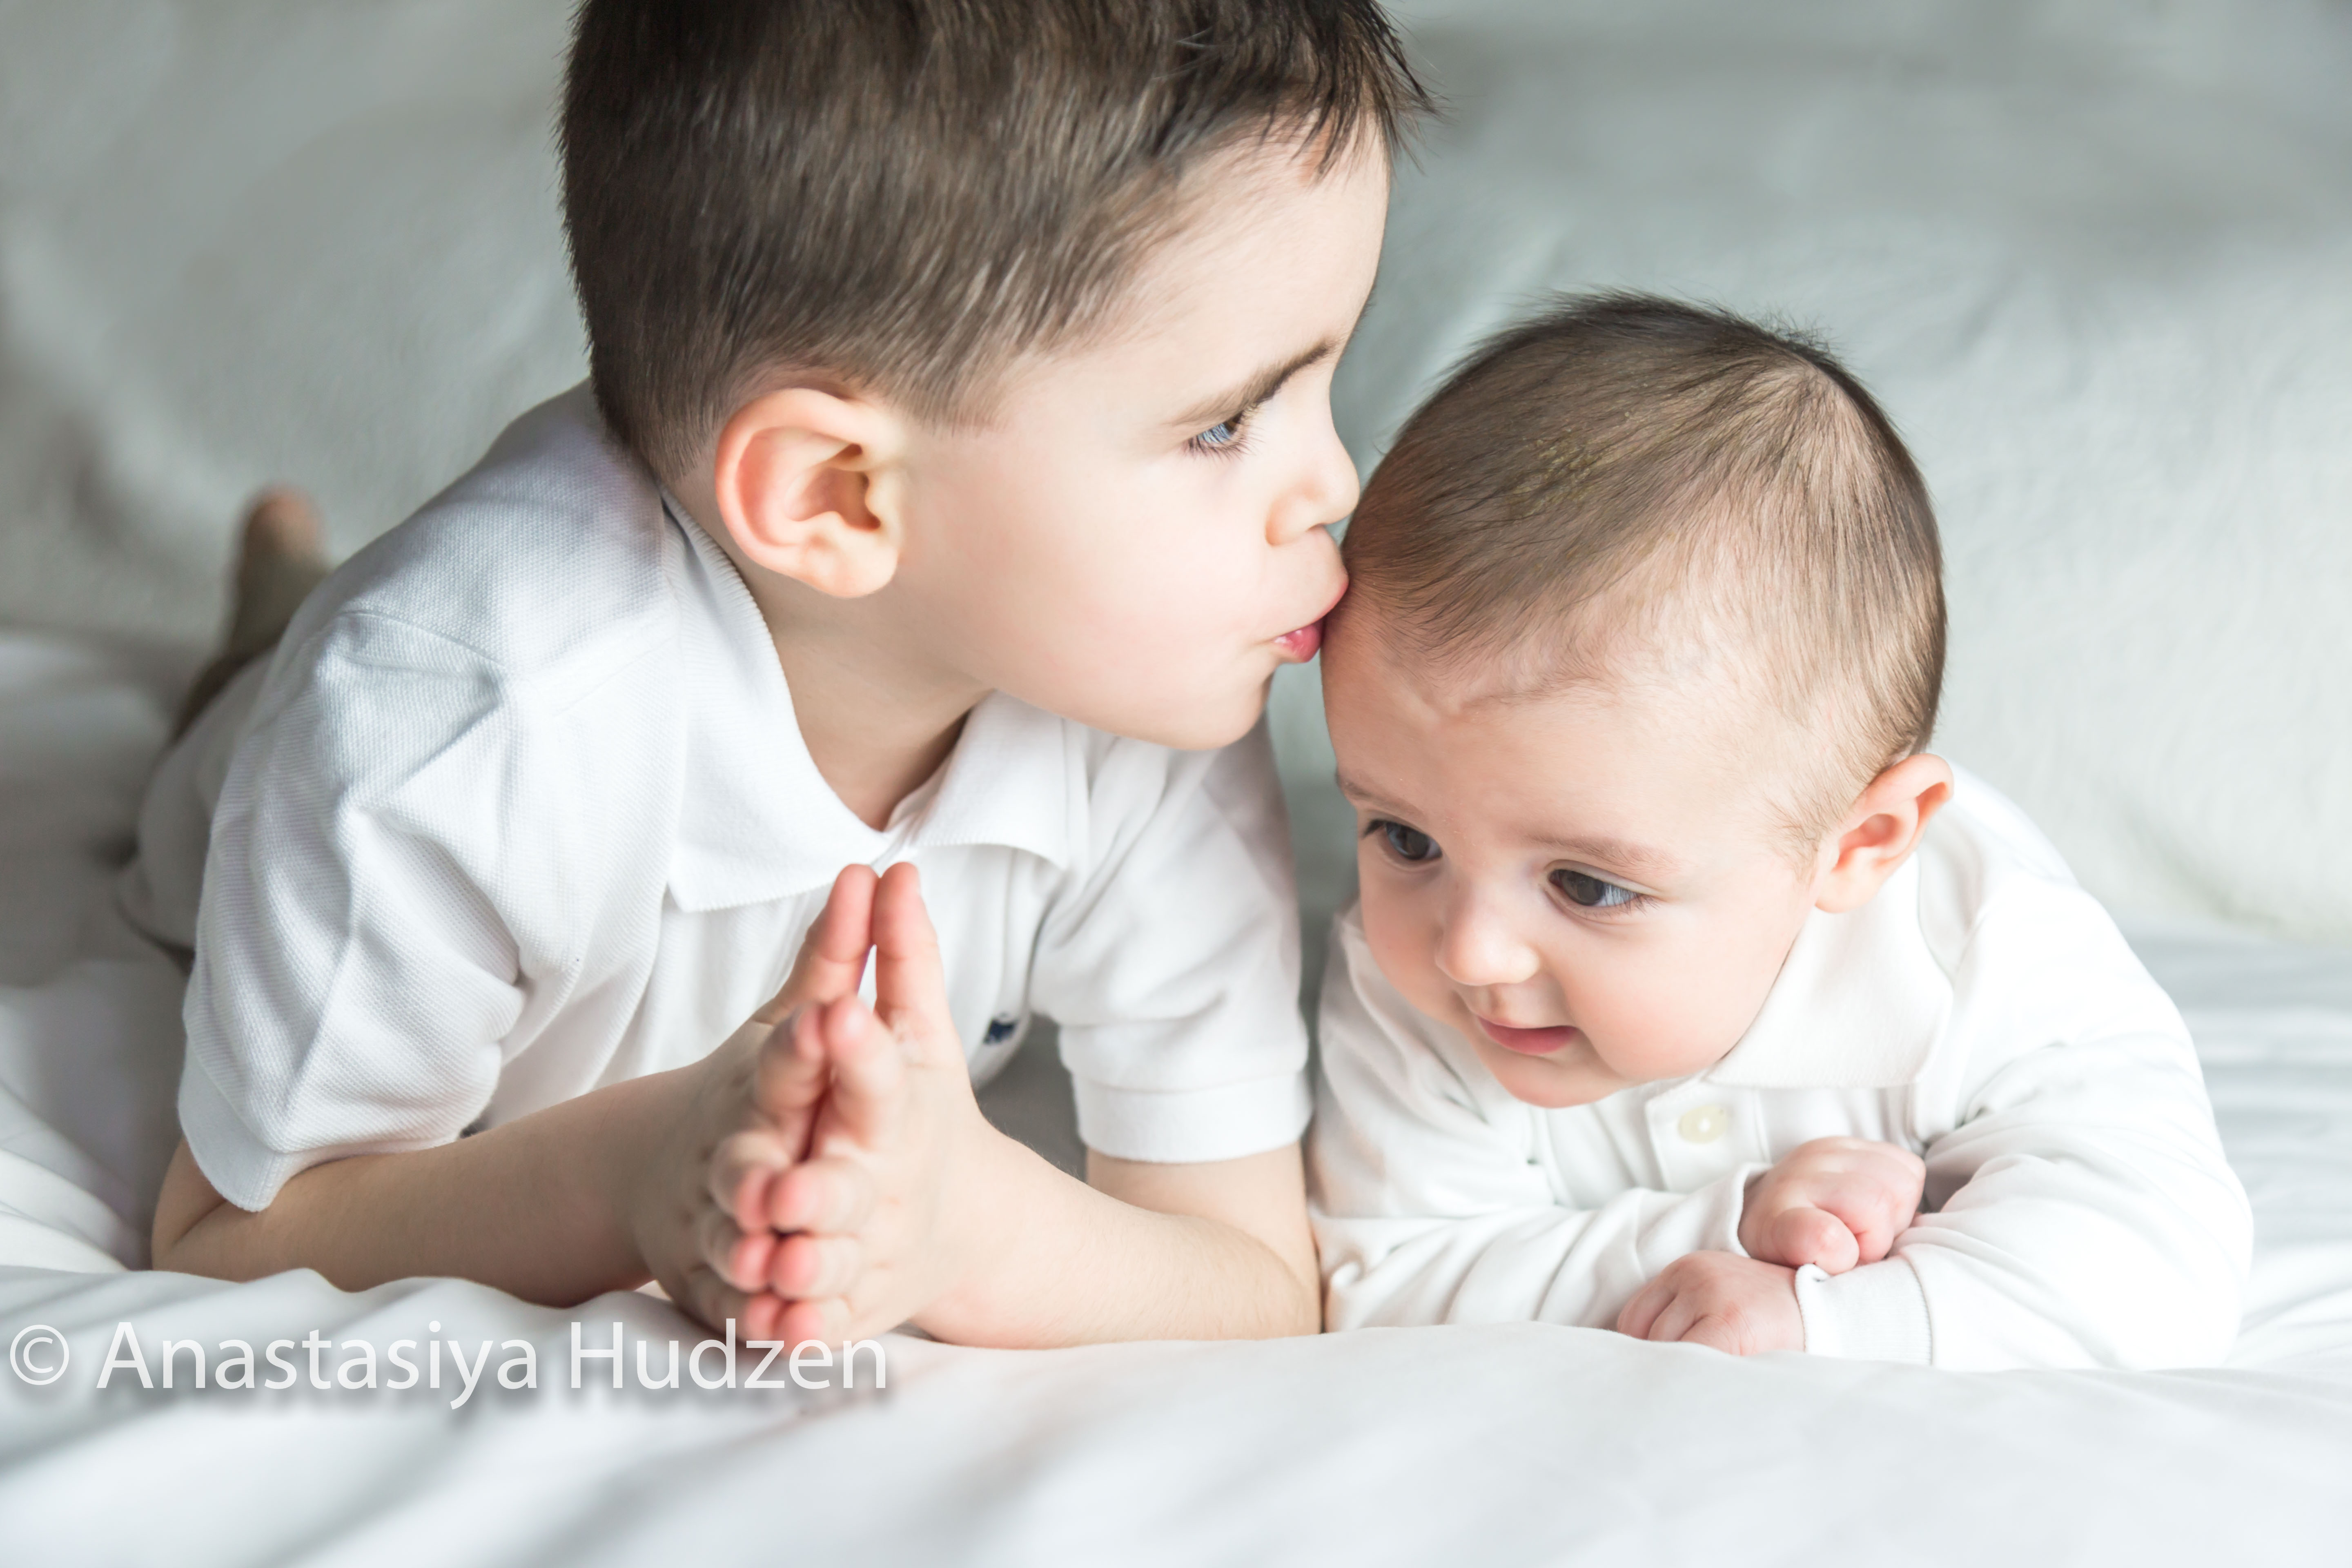 newborn baby boy photography Portuguese Farmington ct brother kissing 3 months old